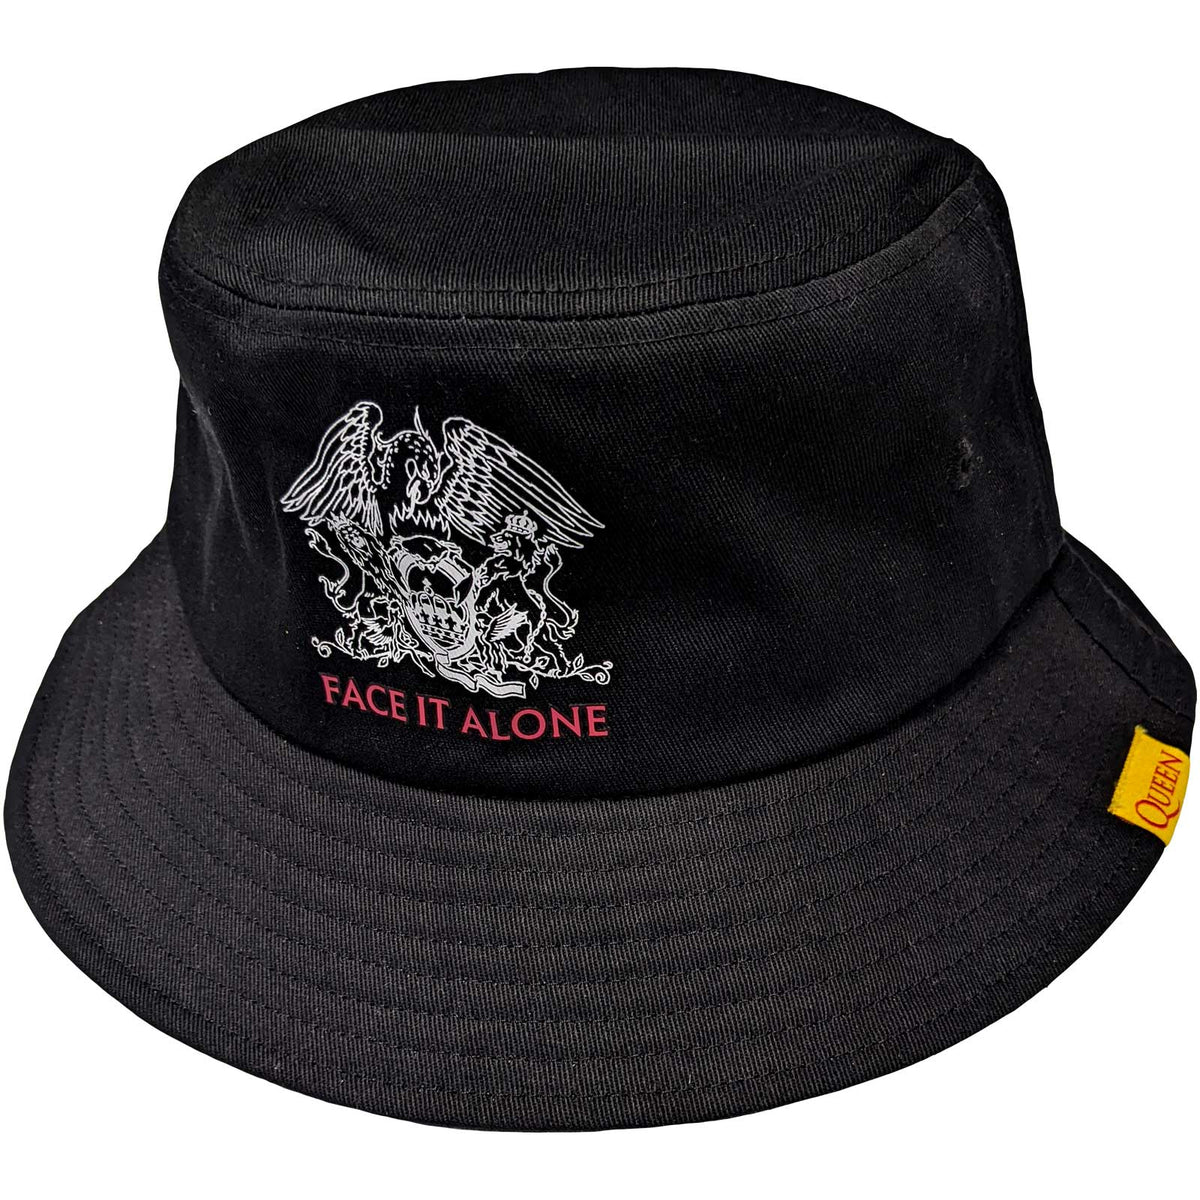 Queen Bucket Hat - Face It Alone - Official Licensed Product